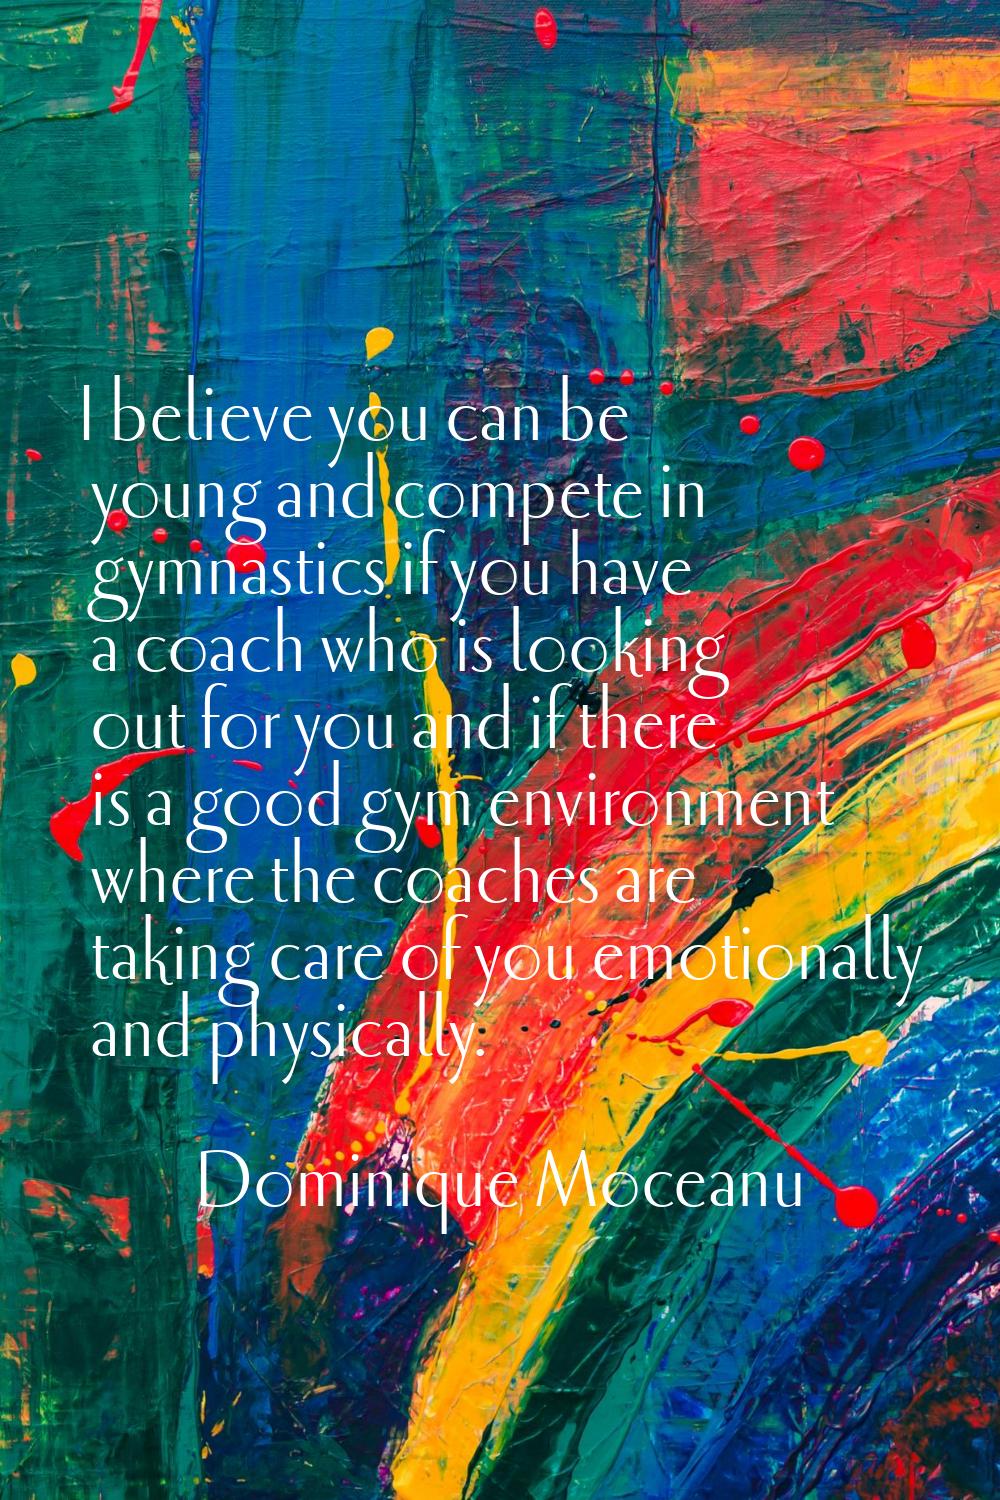 I believe you can be young and compete in gymnastics if you have a coach who is looking out for you